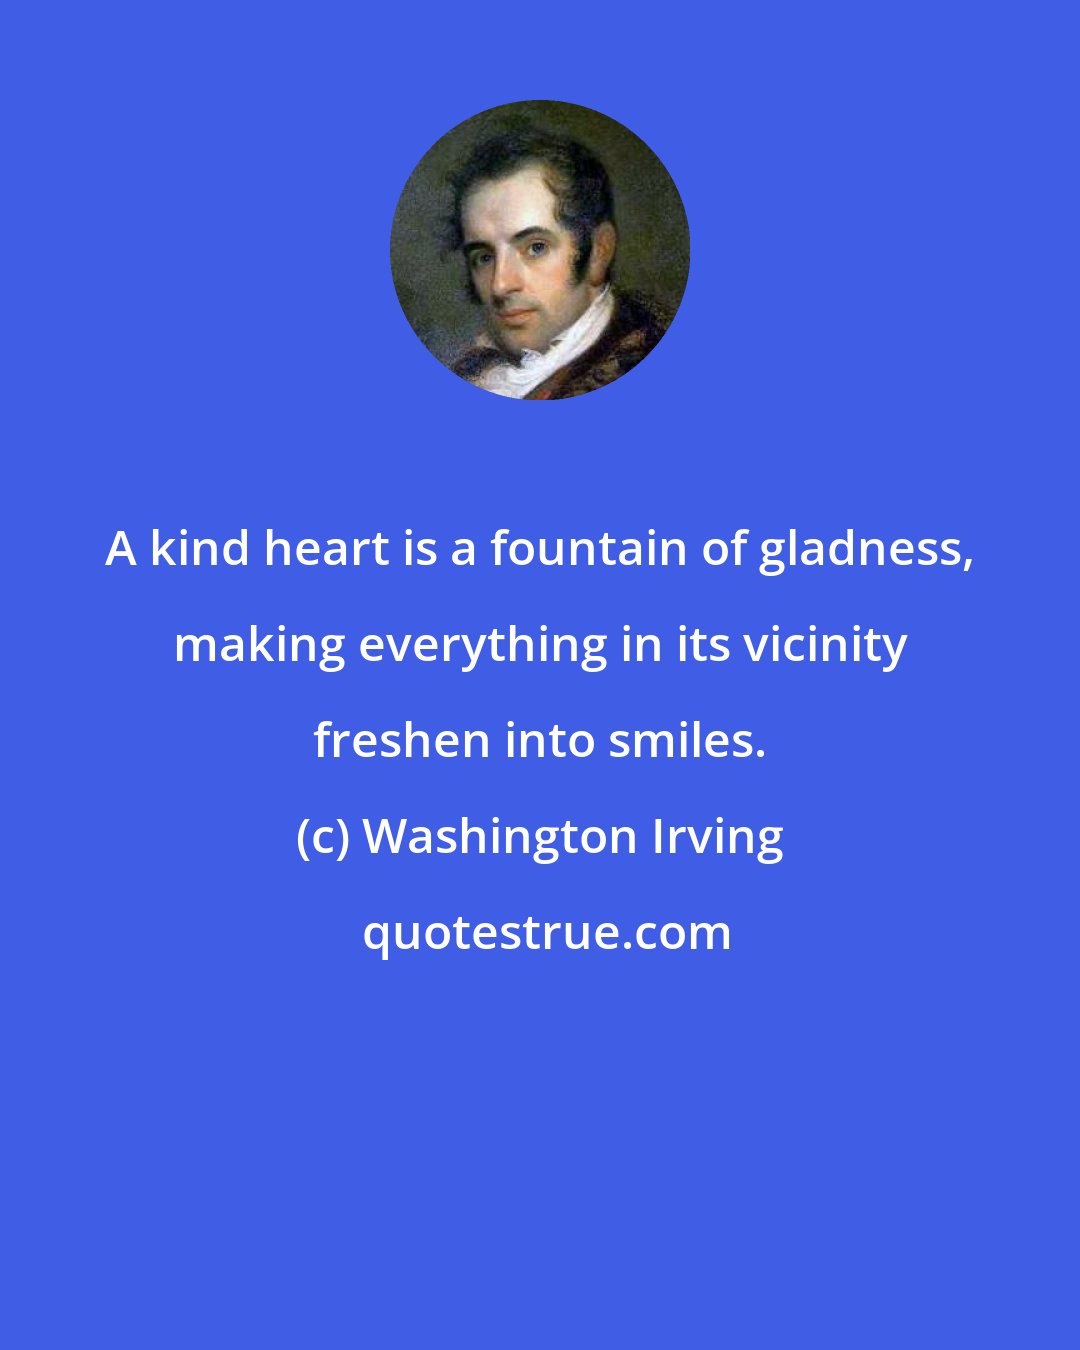 Washington Irving: A kind heart is a fountain of gladness, making everything in its vicinity freshen into smiles.